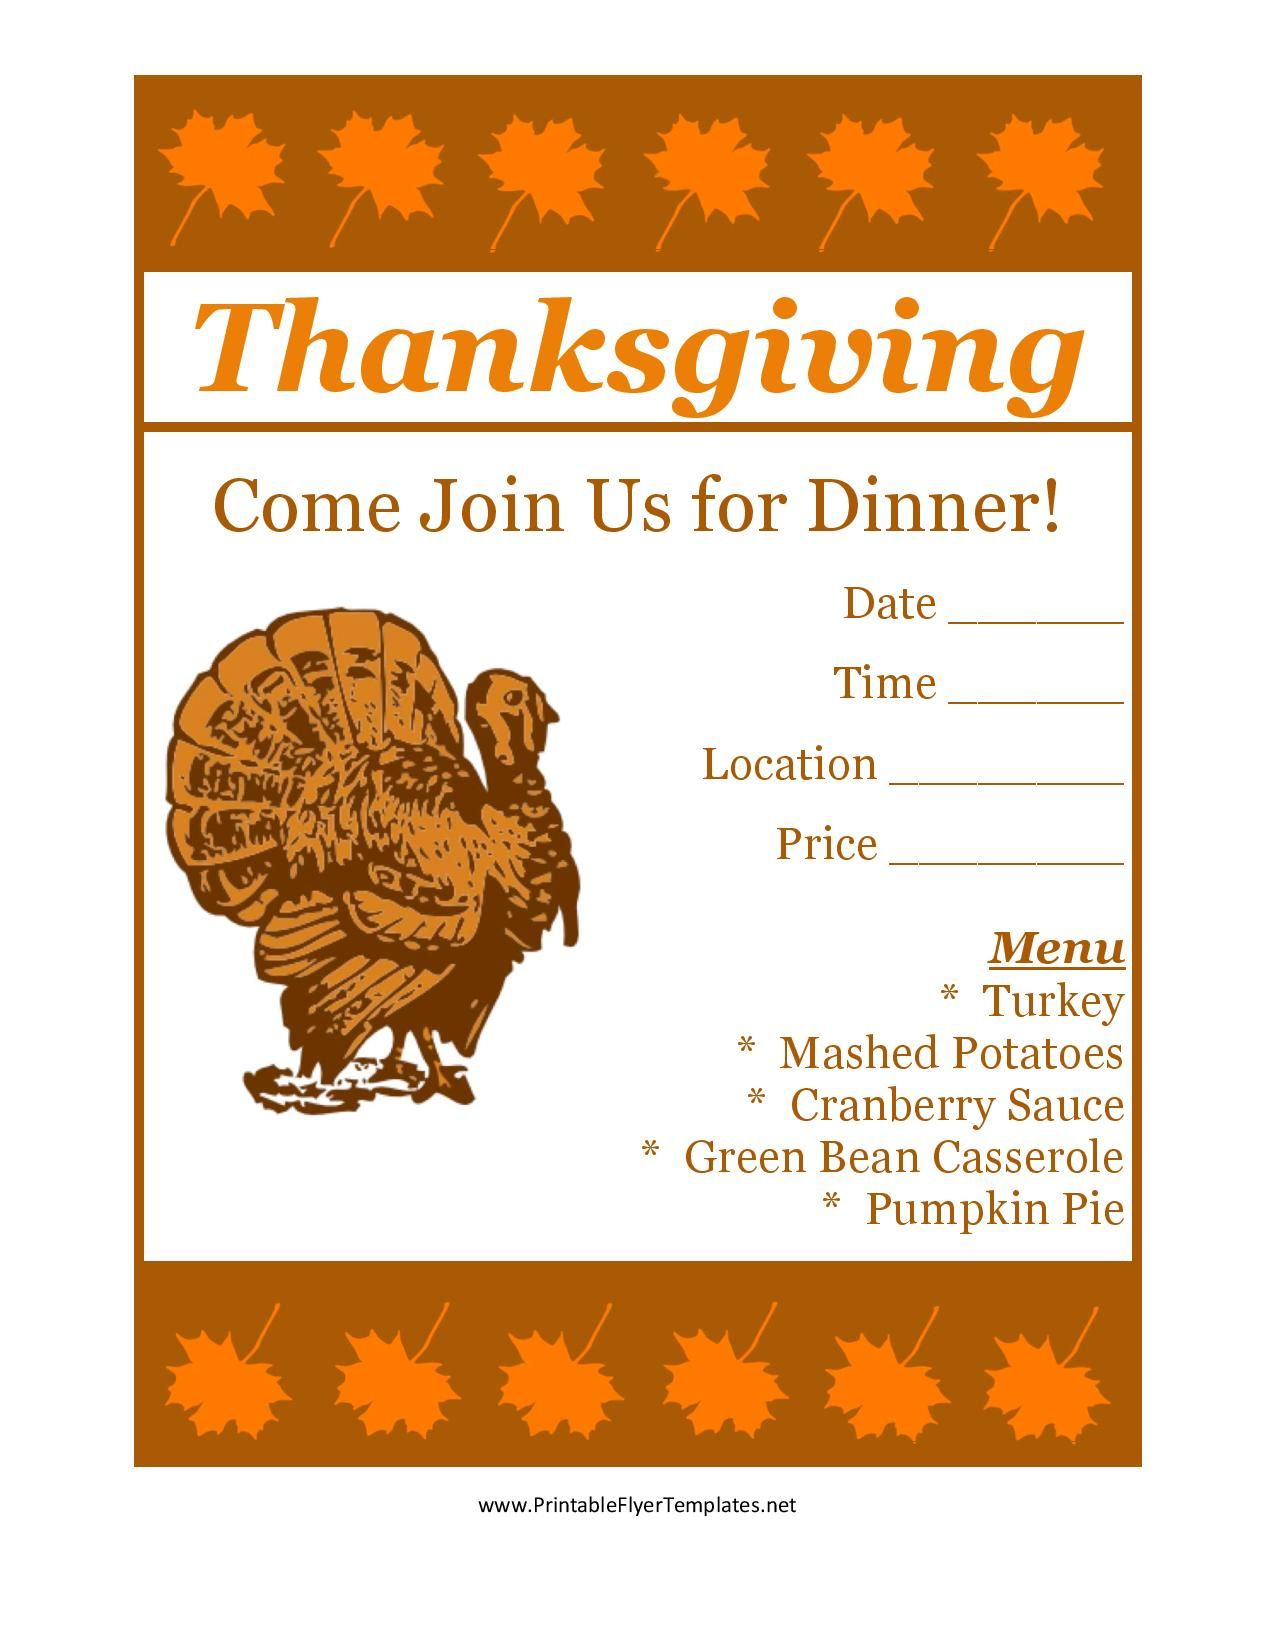 Free Printable Thanksgiving Flyer Invintation Template Holidays for dimensions 1275 X 1650